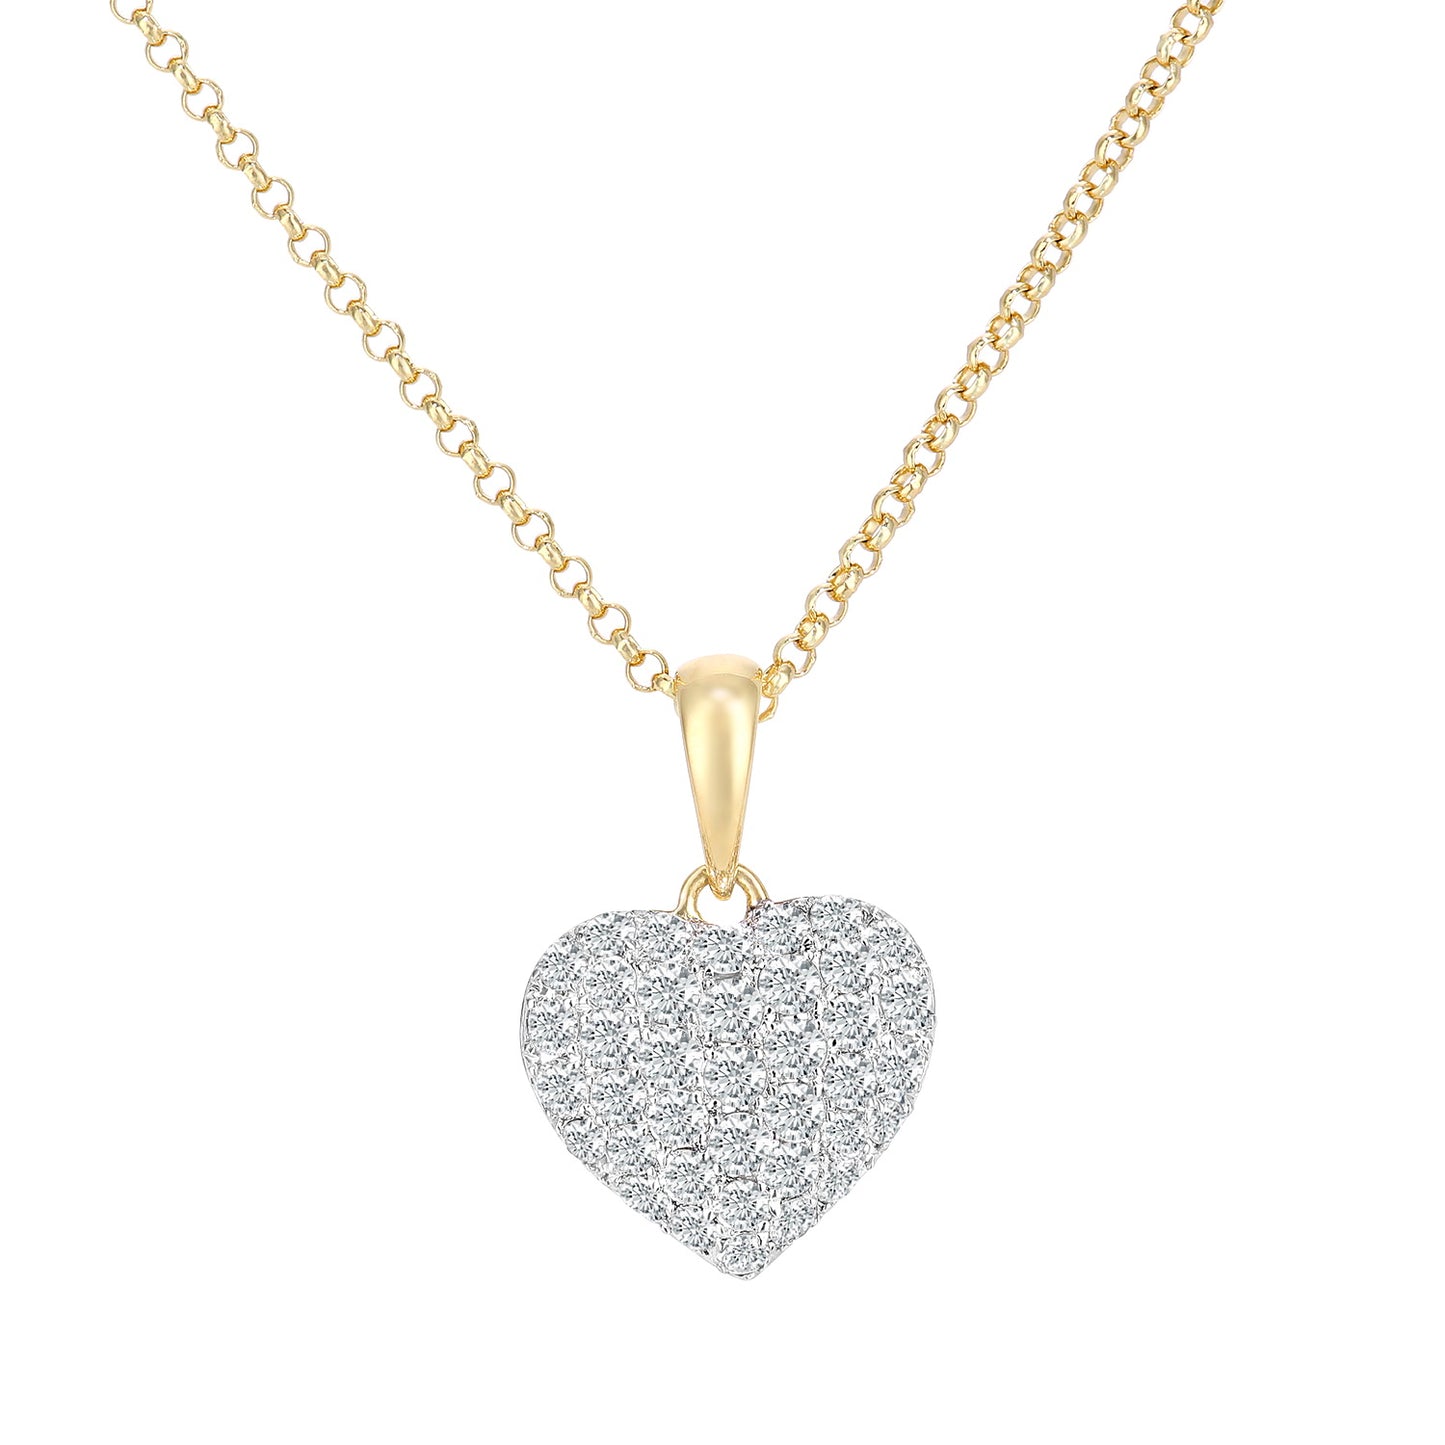 18ct Gold  Round 1/2ct Diamond Heart Pendant Necklace 16 inch - DP1AXL658Y18